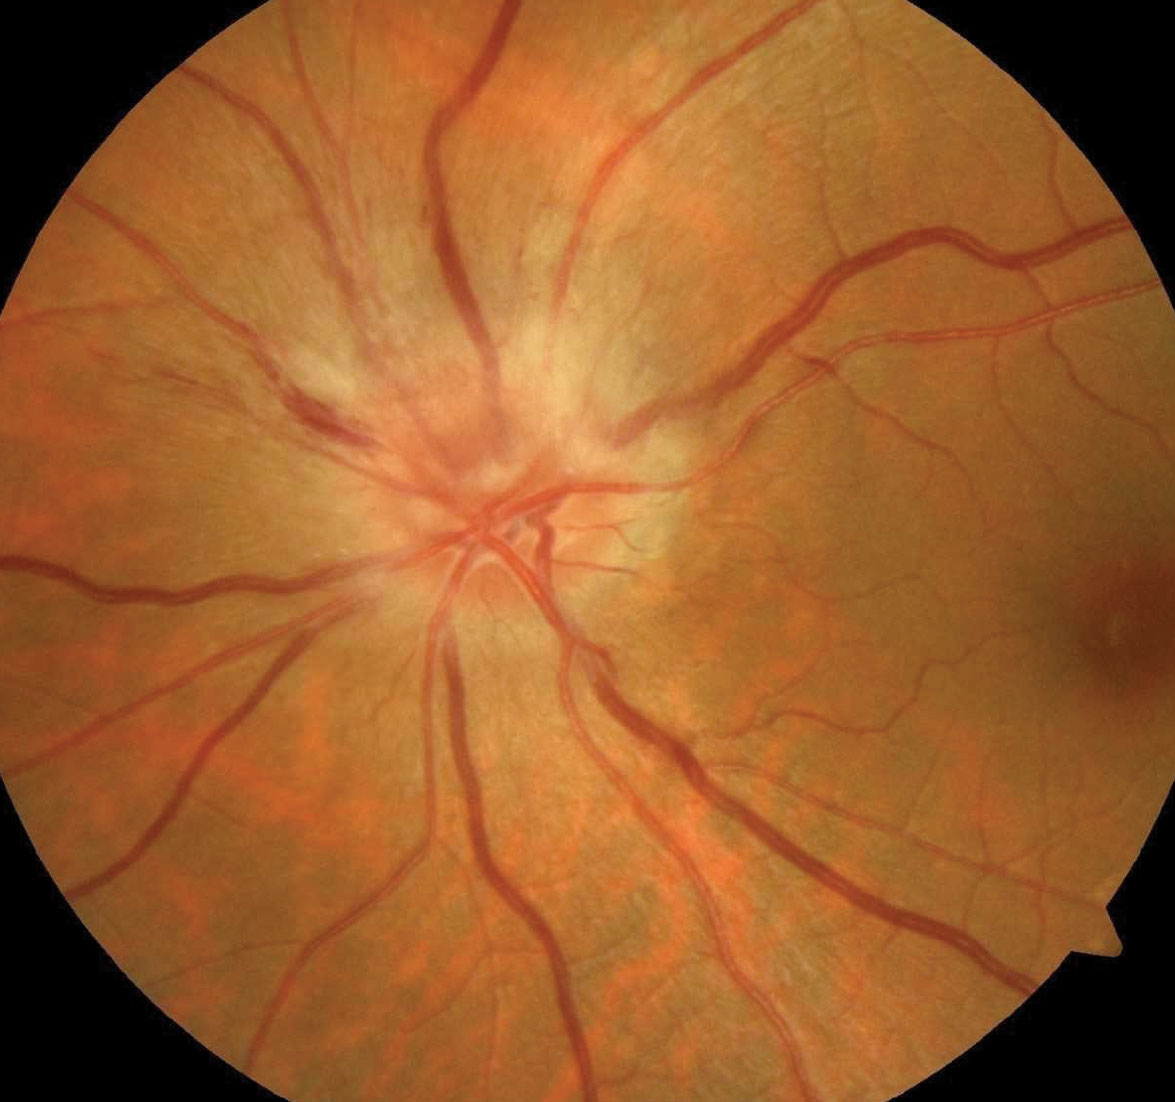 A retrospective population study maintains that patients age 50 and older are at higher risk for nonarteritic anterior ischemic optic neuropathy while incidence rates have been stable across four decades. 